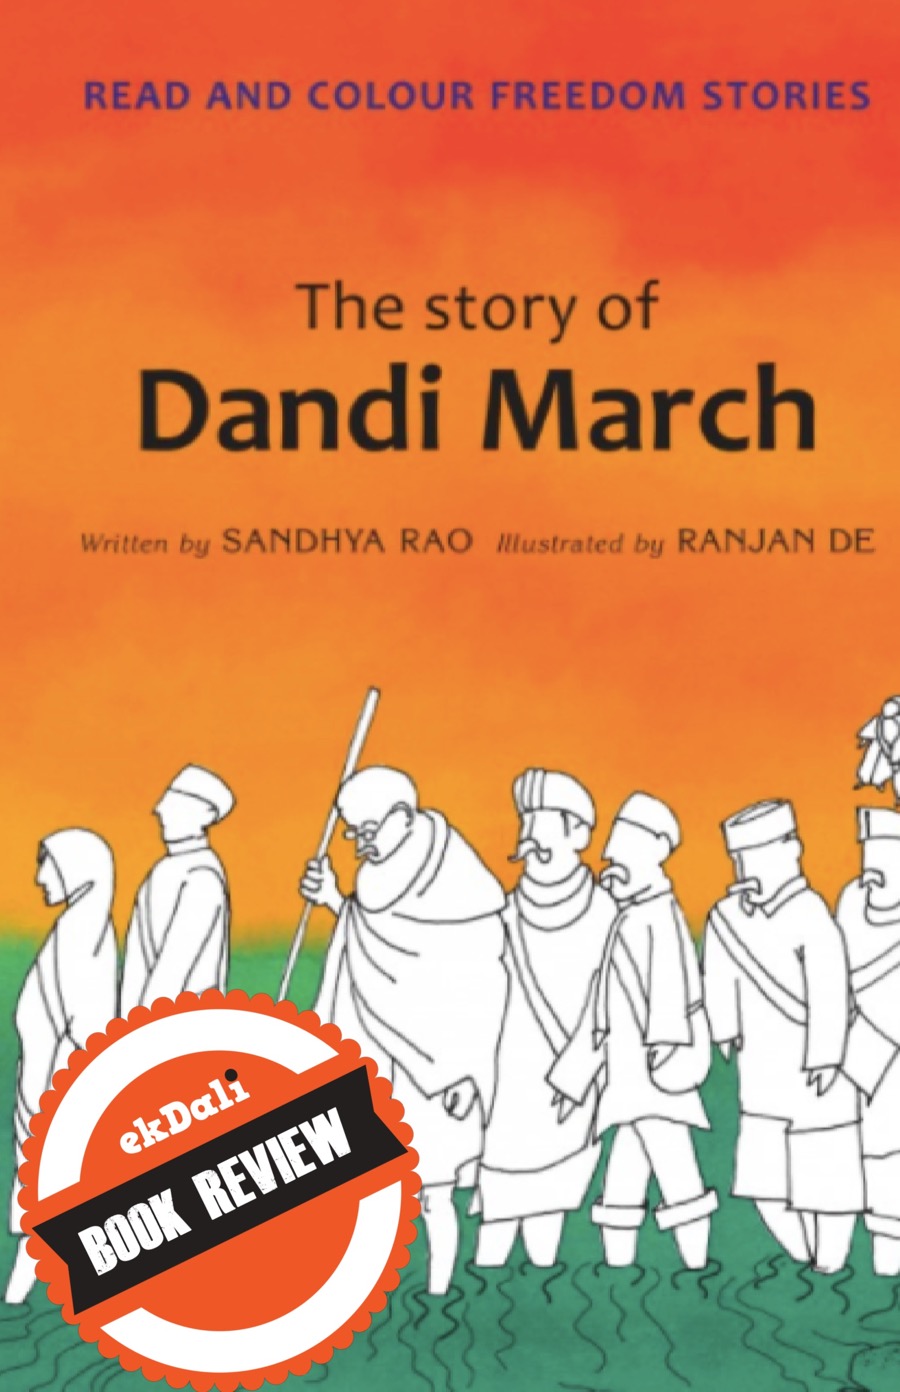 Book Review: The story of Dandi March